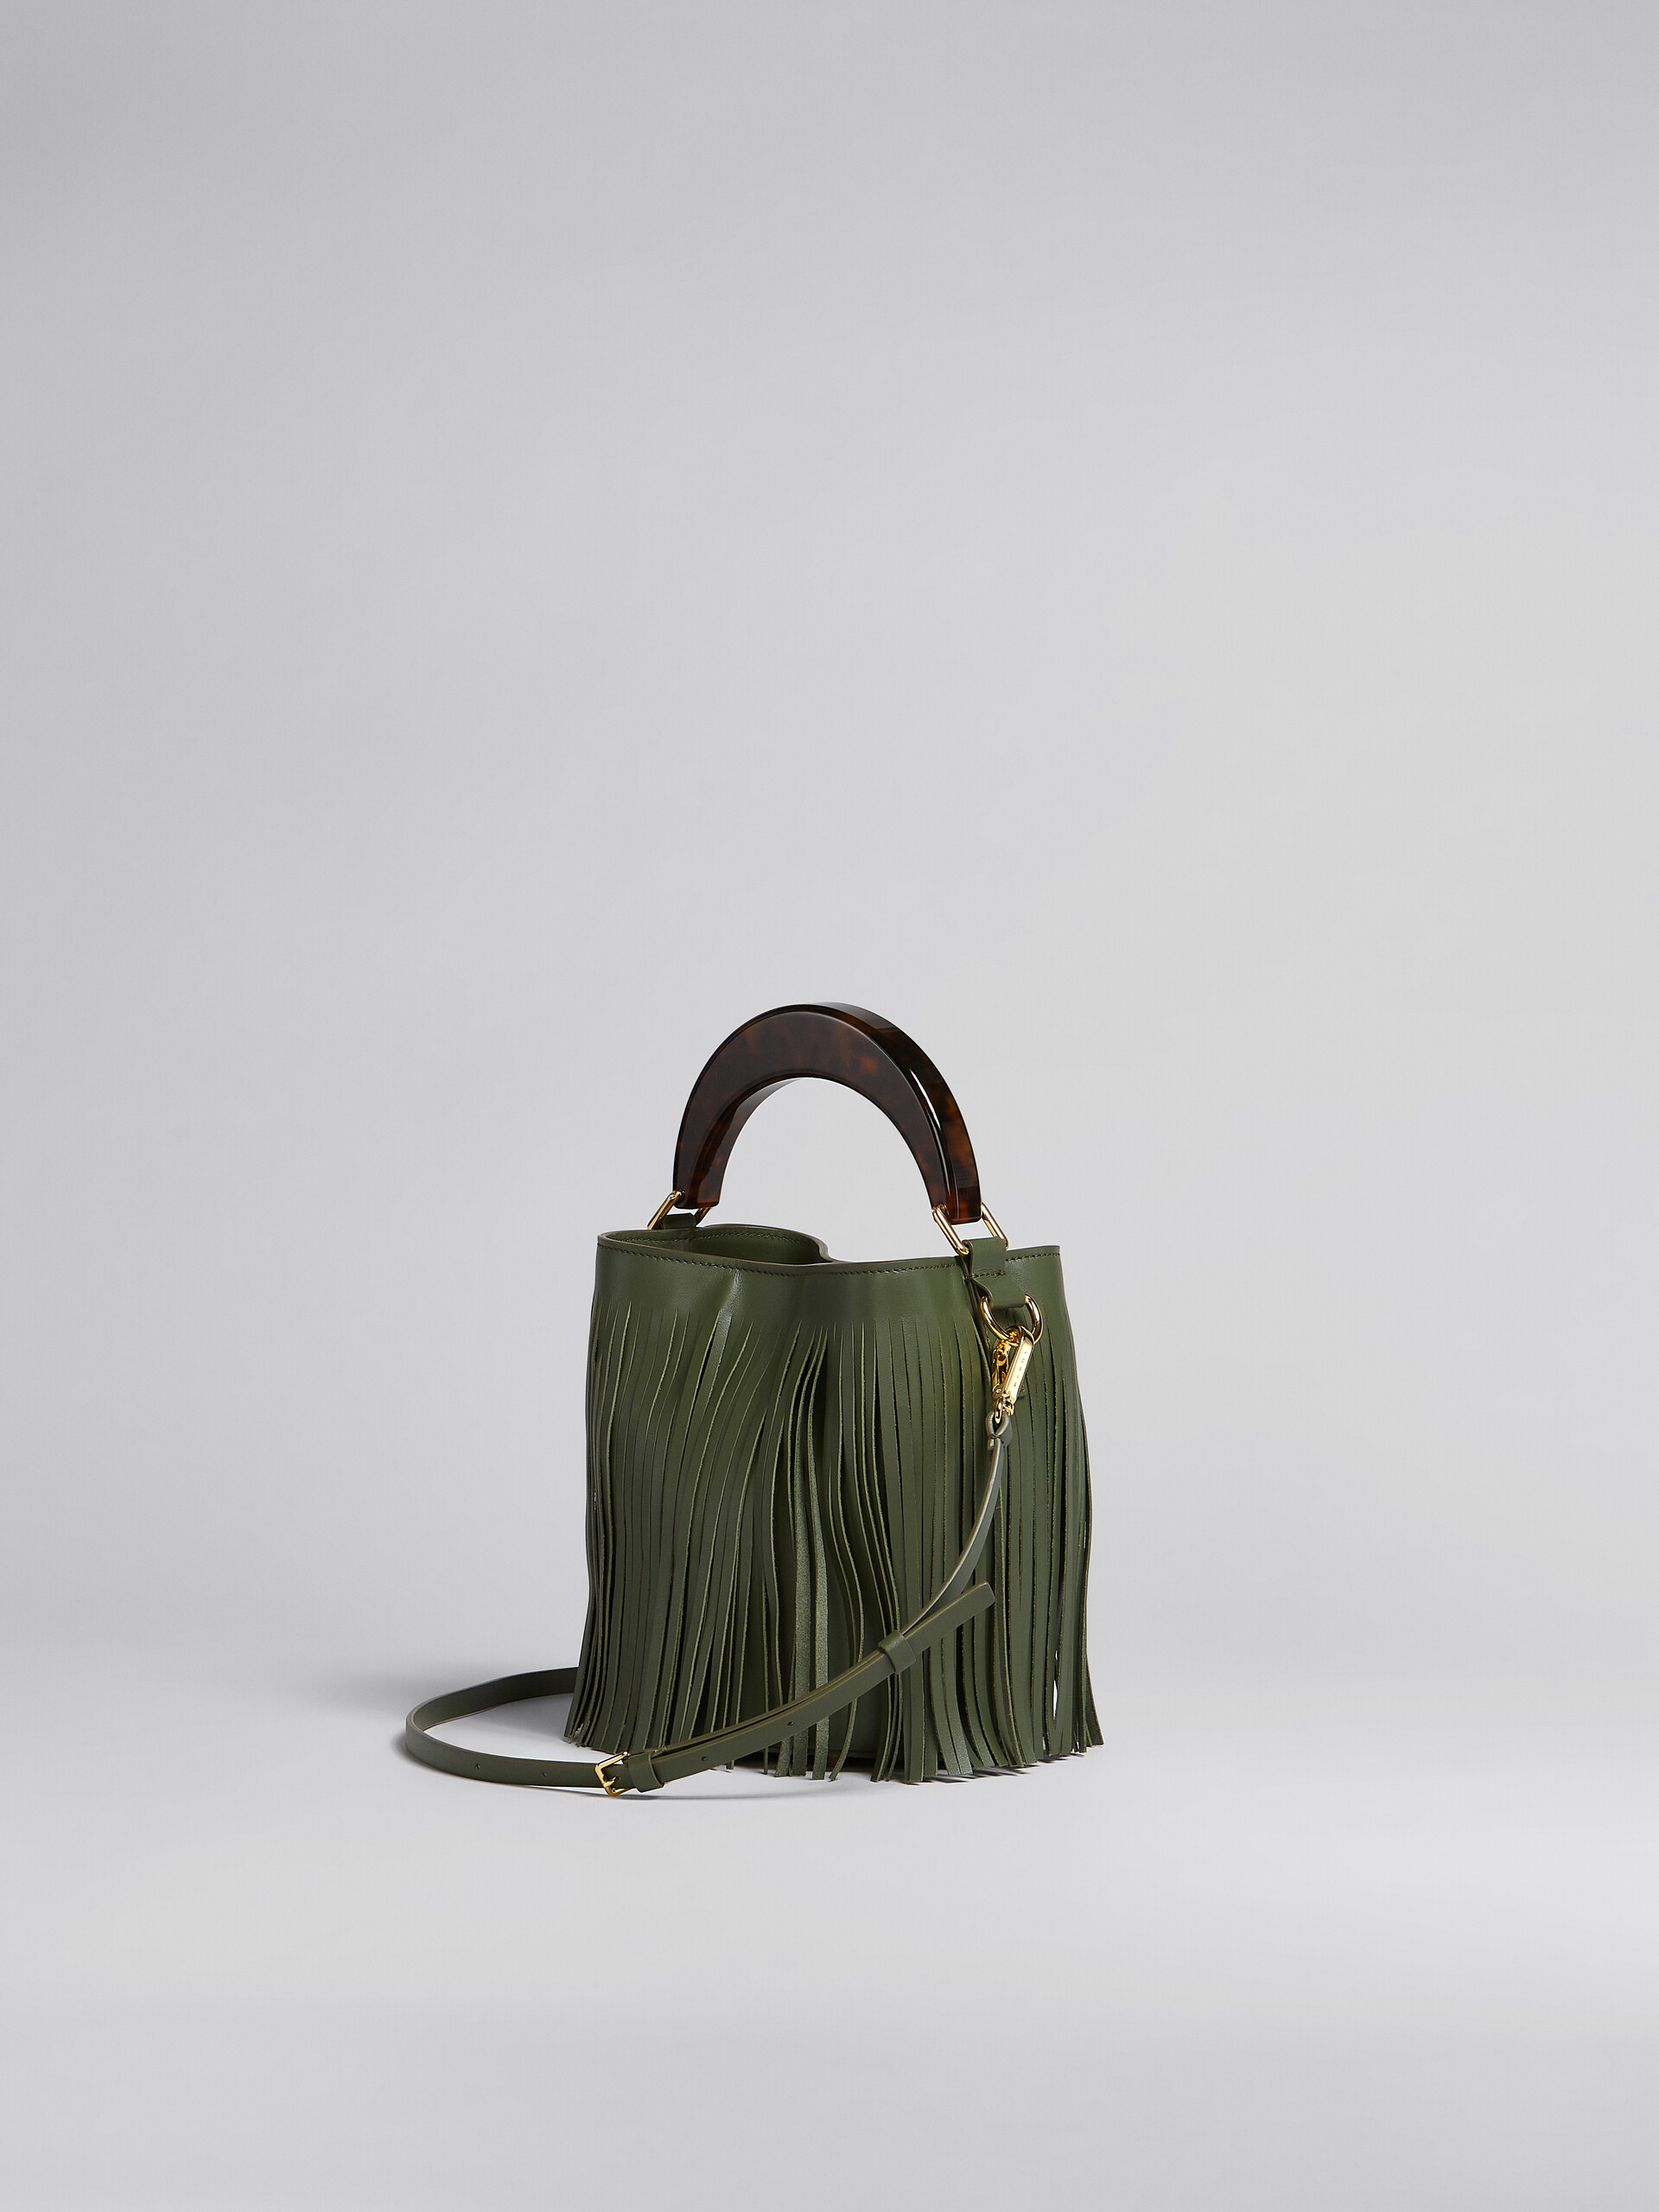 Venice Small Bucket in green leather with fringes - Shoulder Bags - Image 3